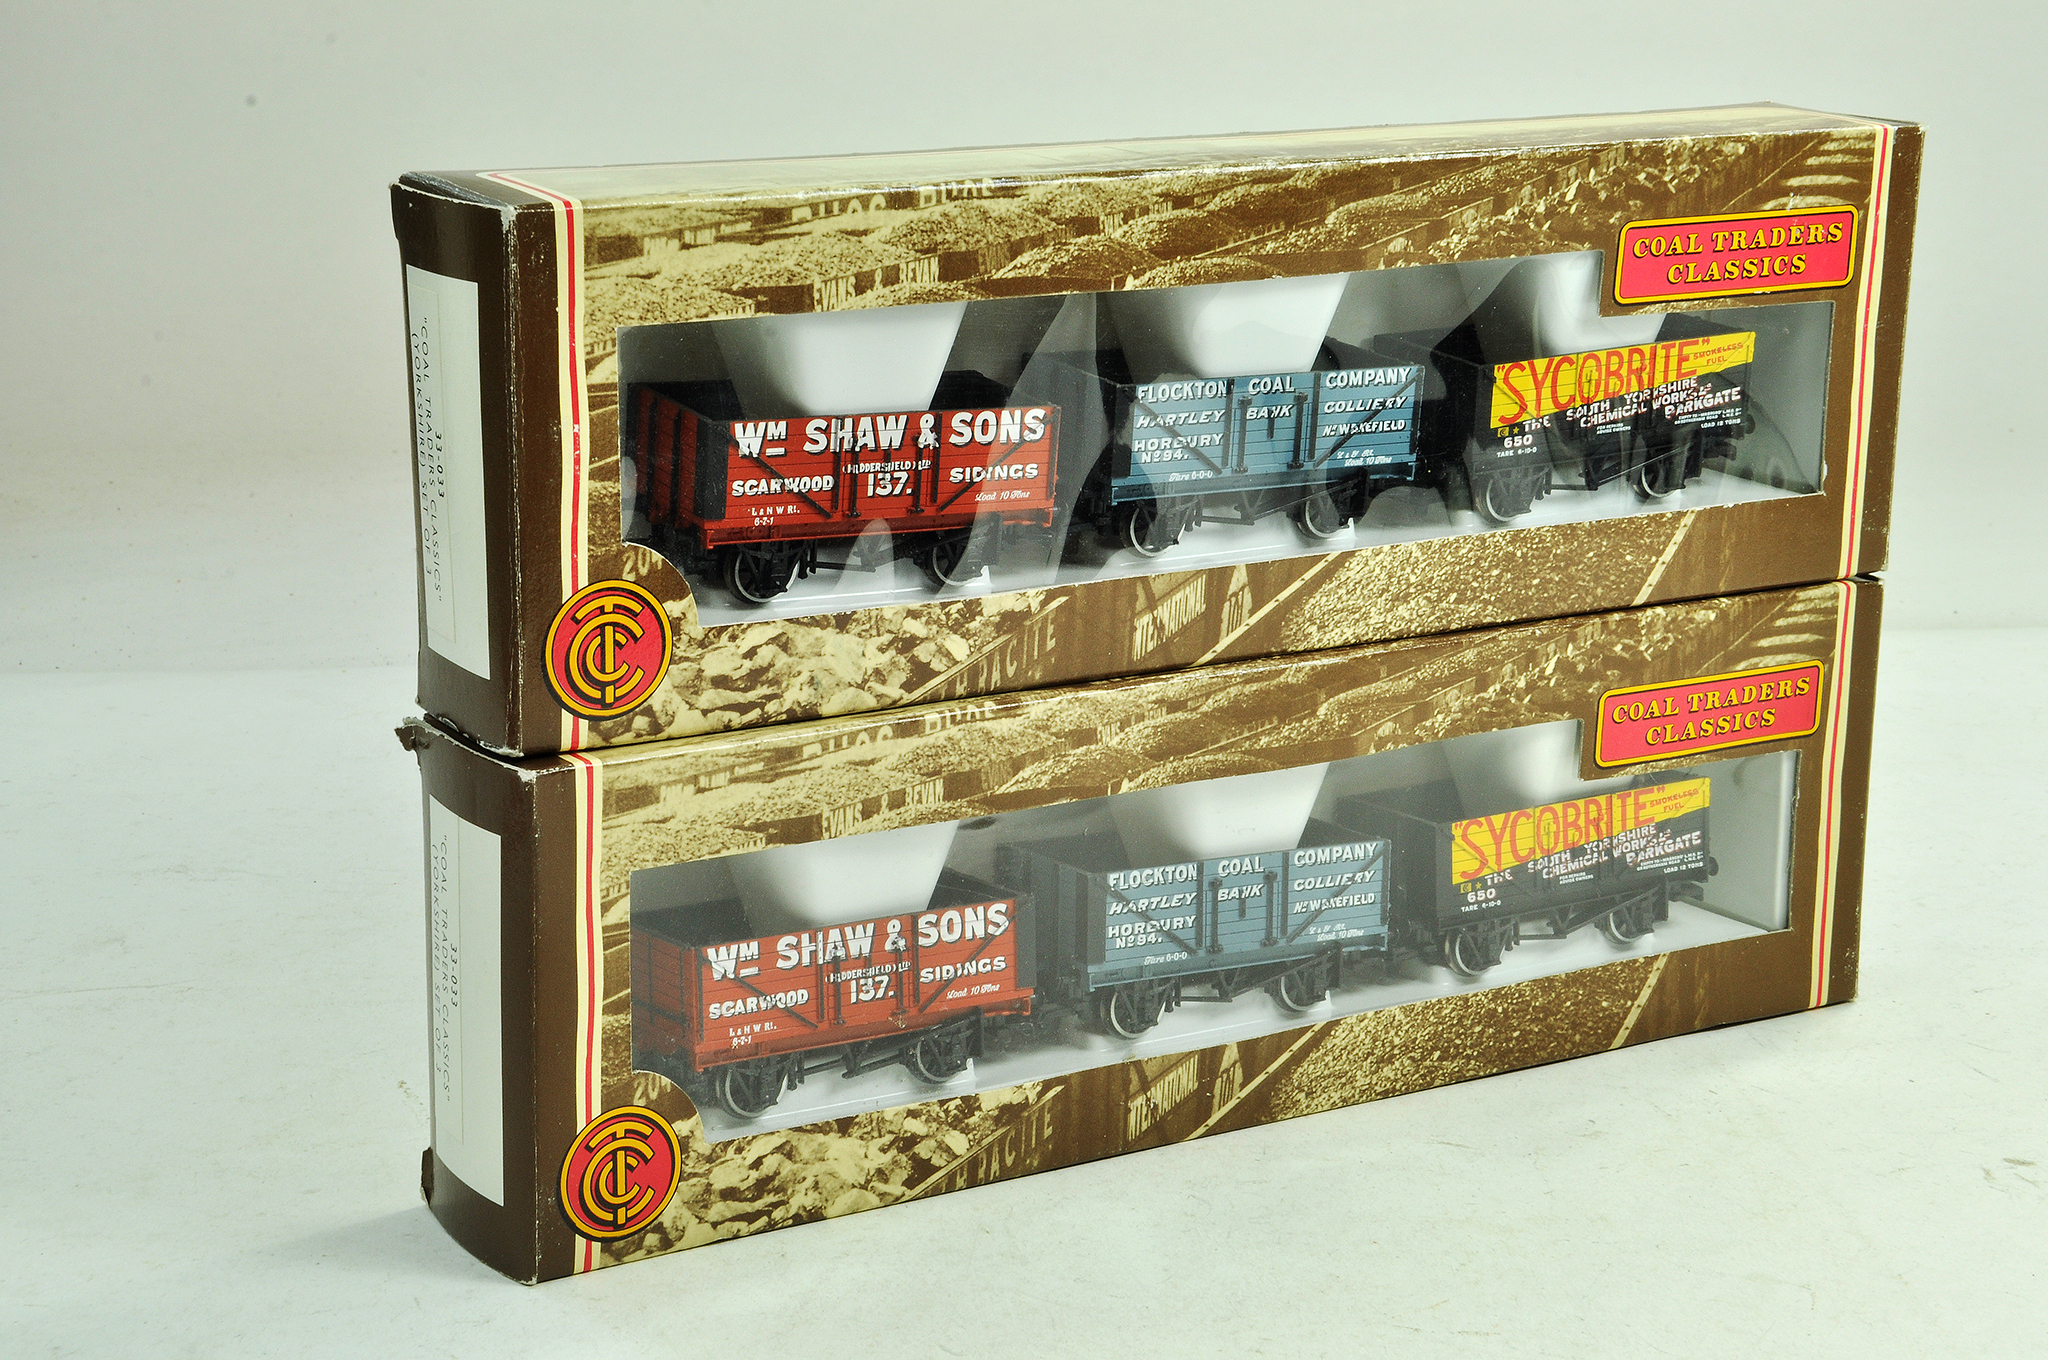 Bachmann Model Railway Issues comprising duo of Coal Trader Classics Wagon Sets. Appear excellent in